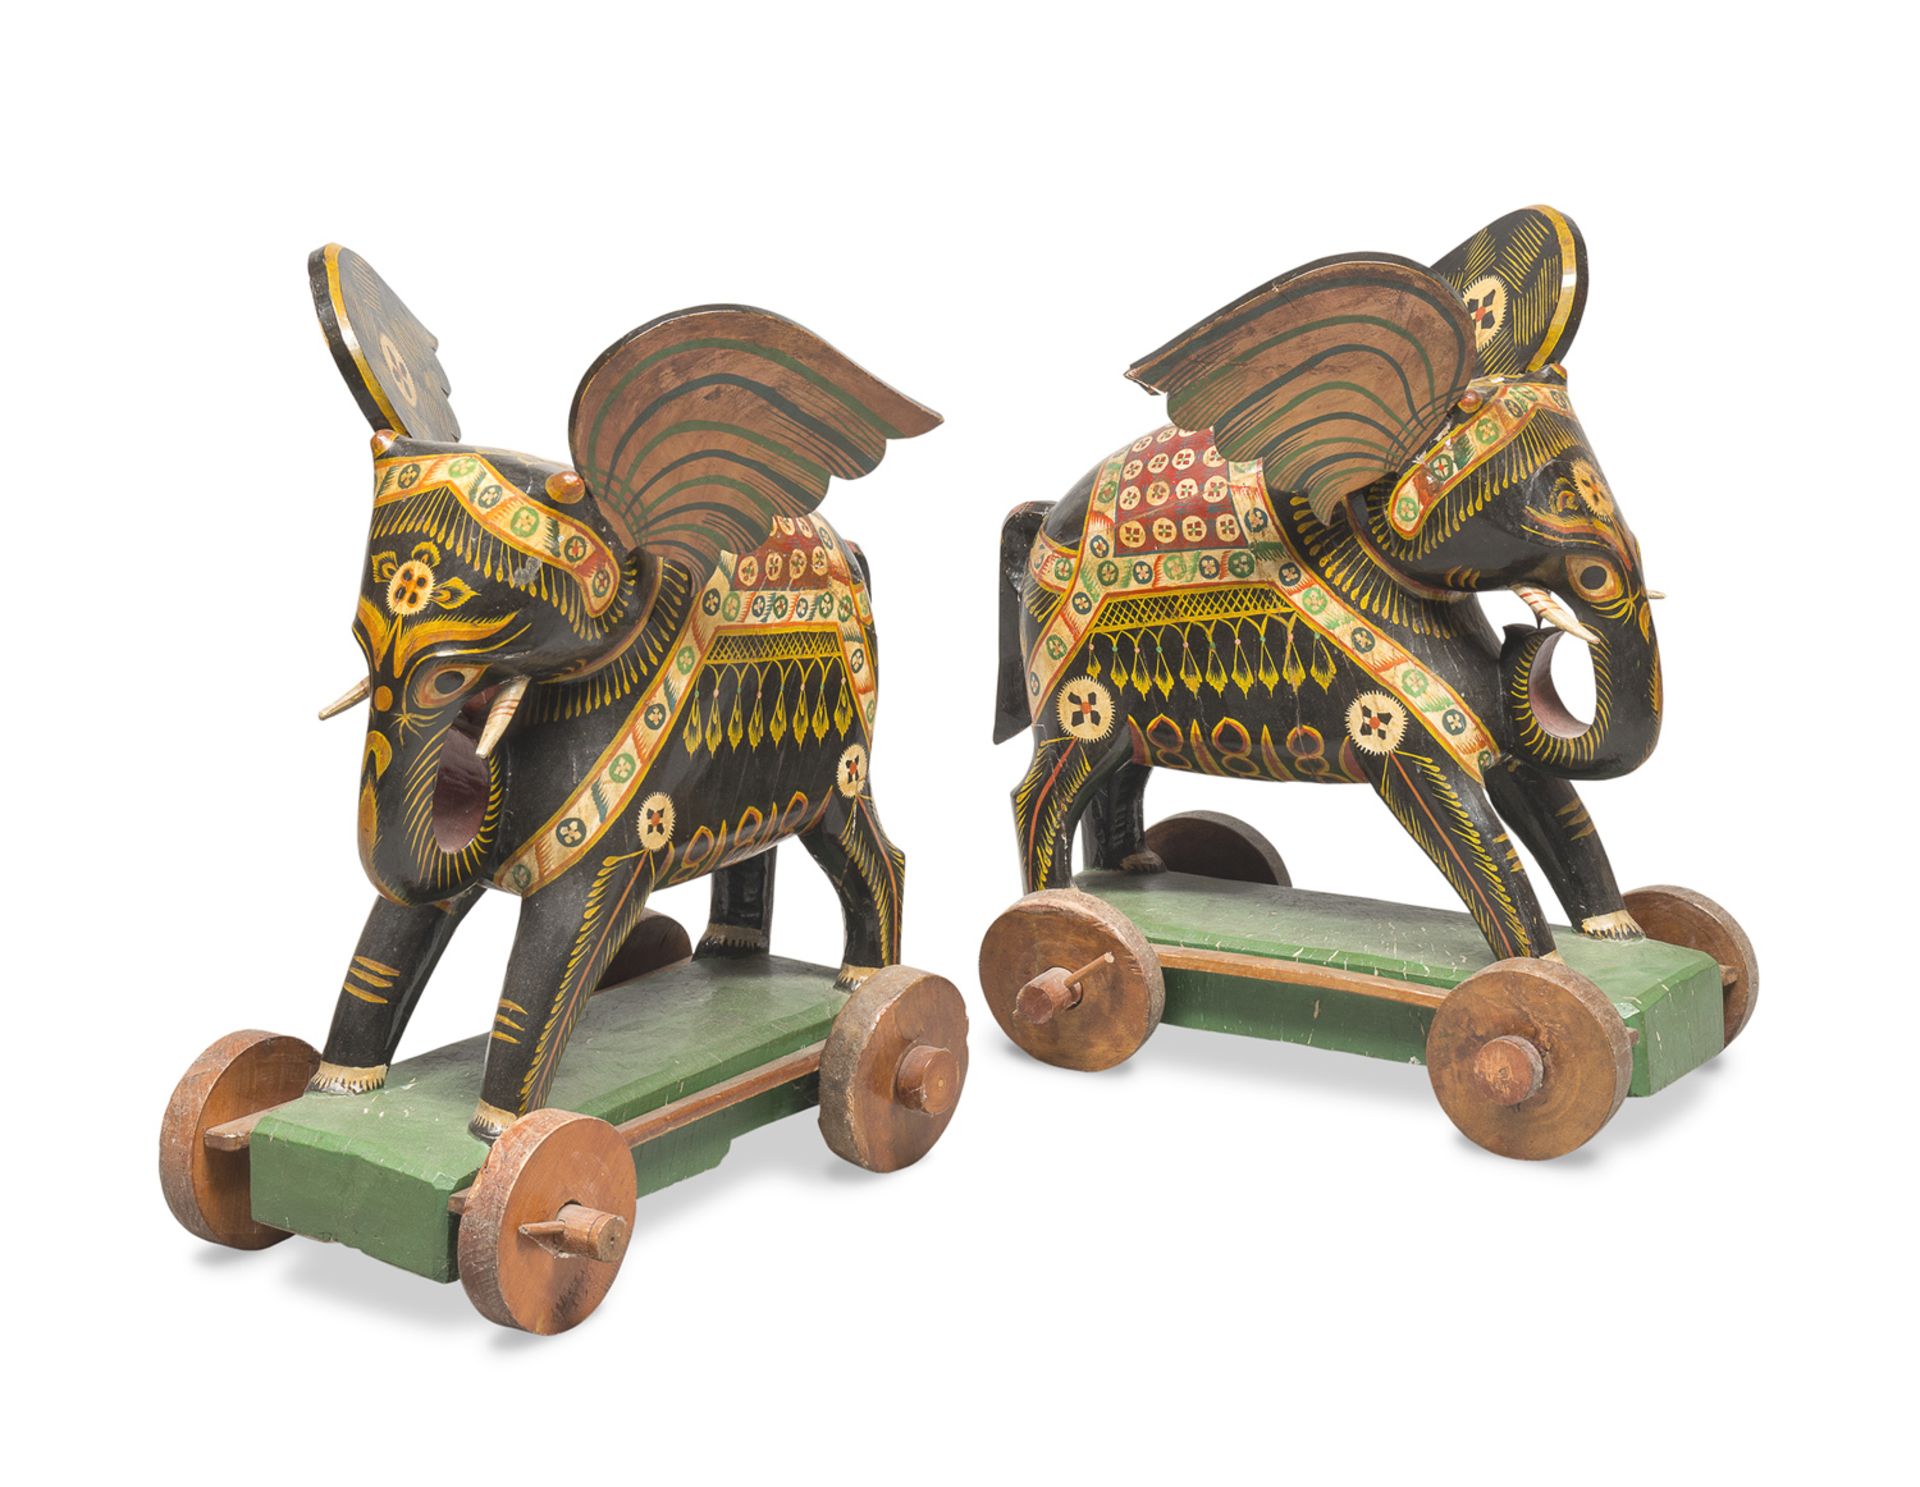 A PAIR OF THAI LAQUER WOOD TOYS IN SHAPE OF ELEPHANTS. EARLY 20TH CENTURY.